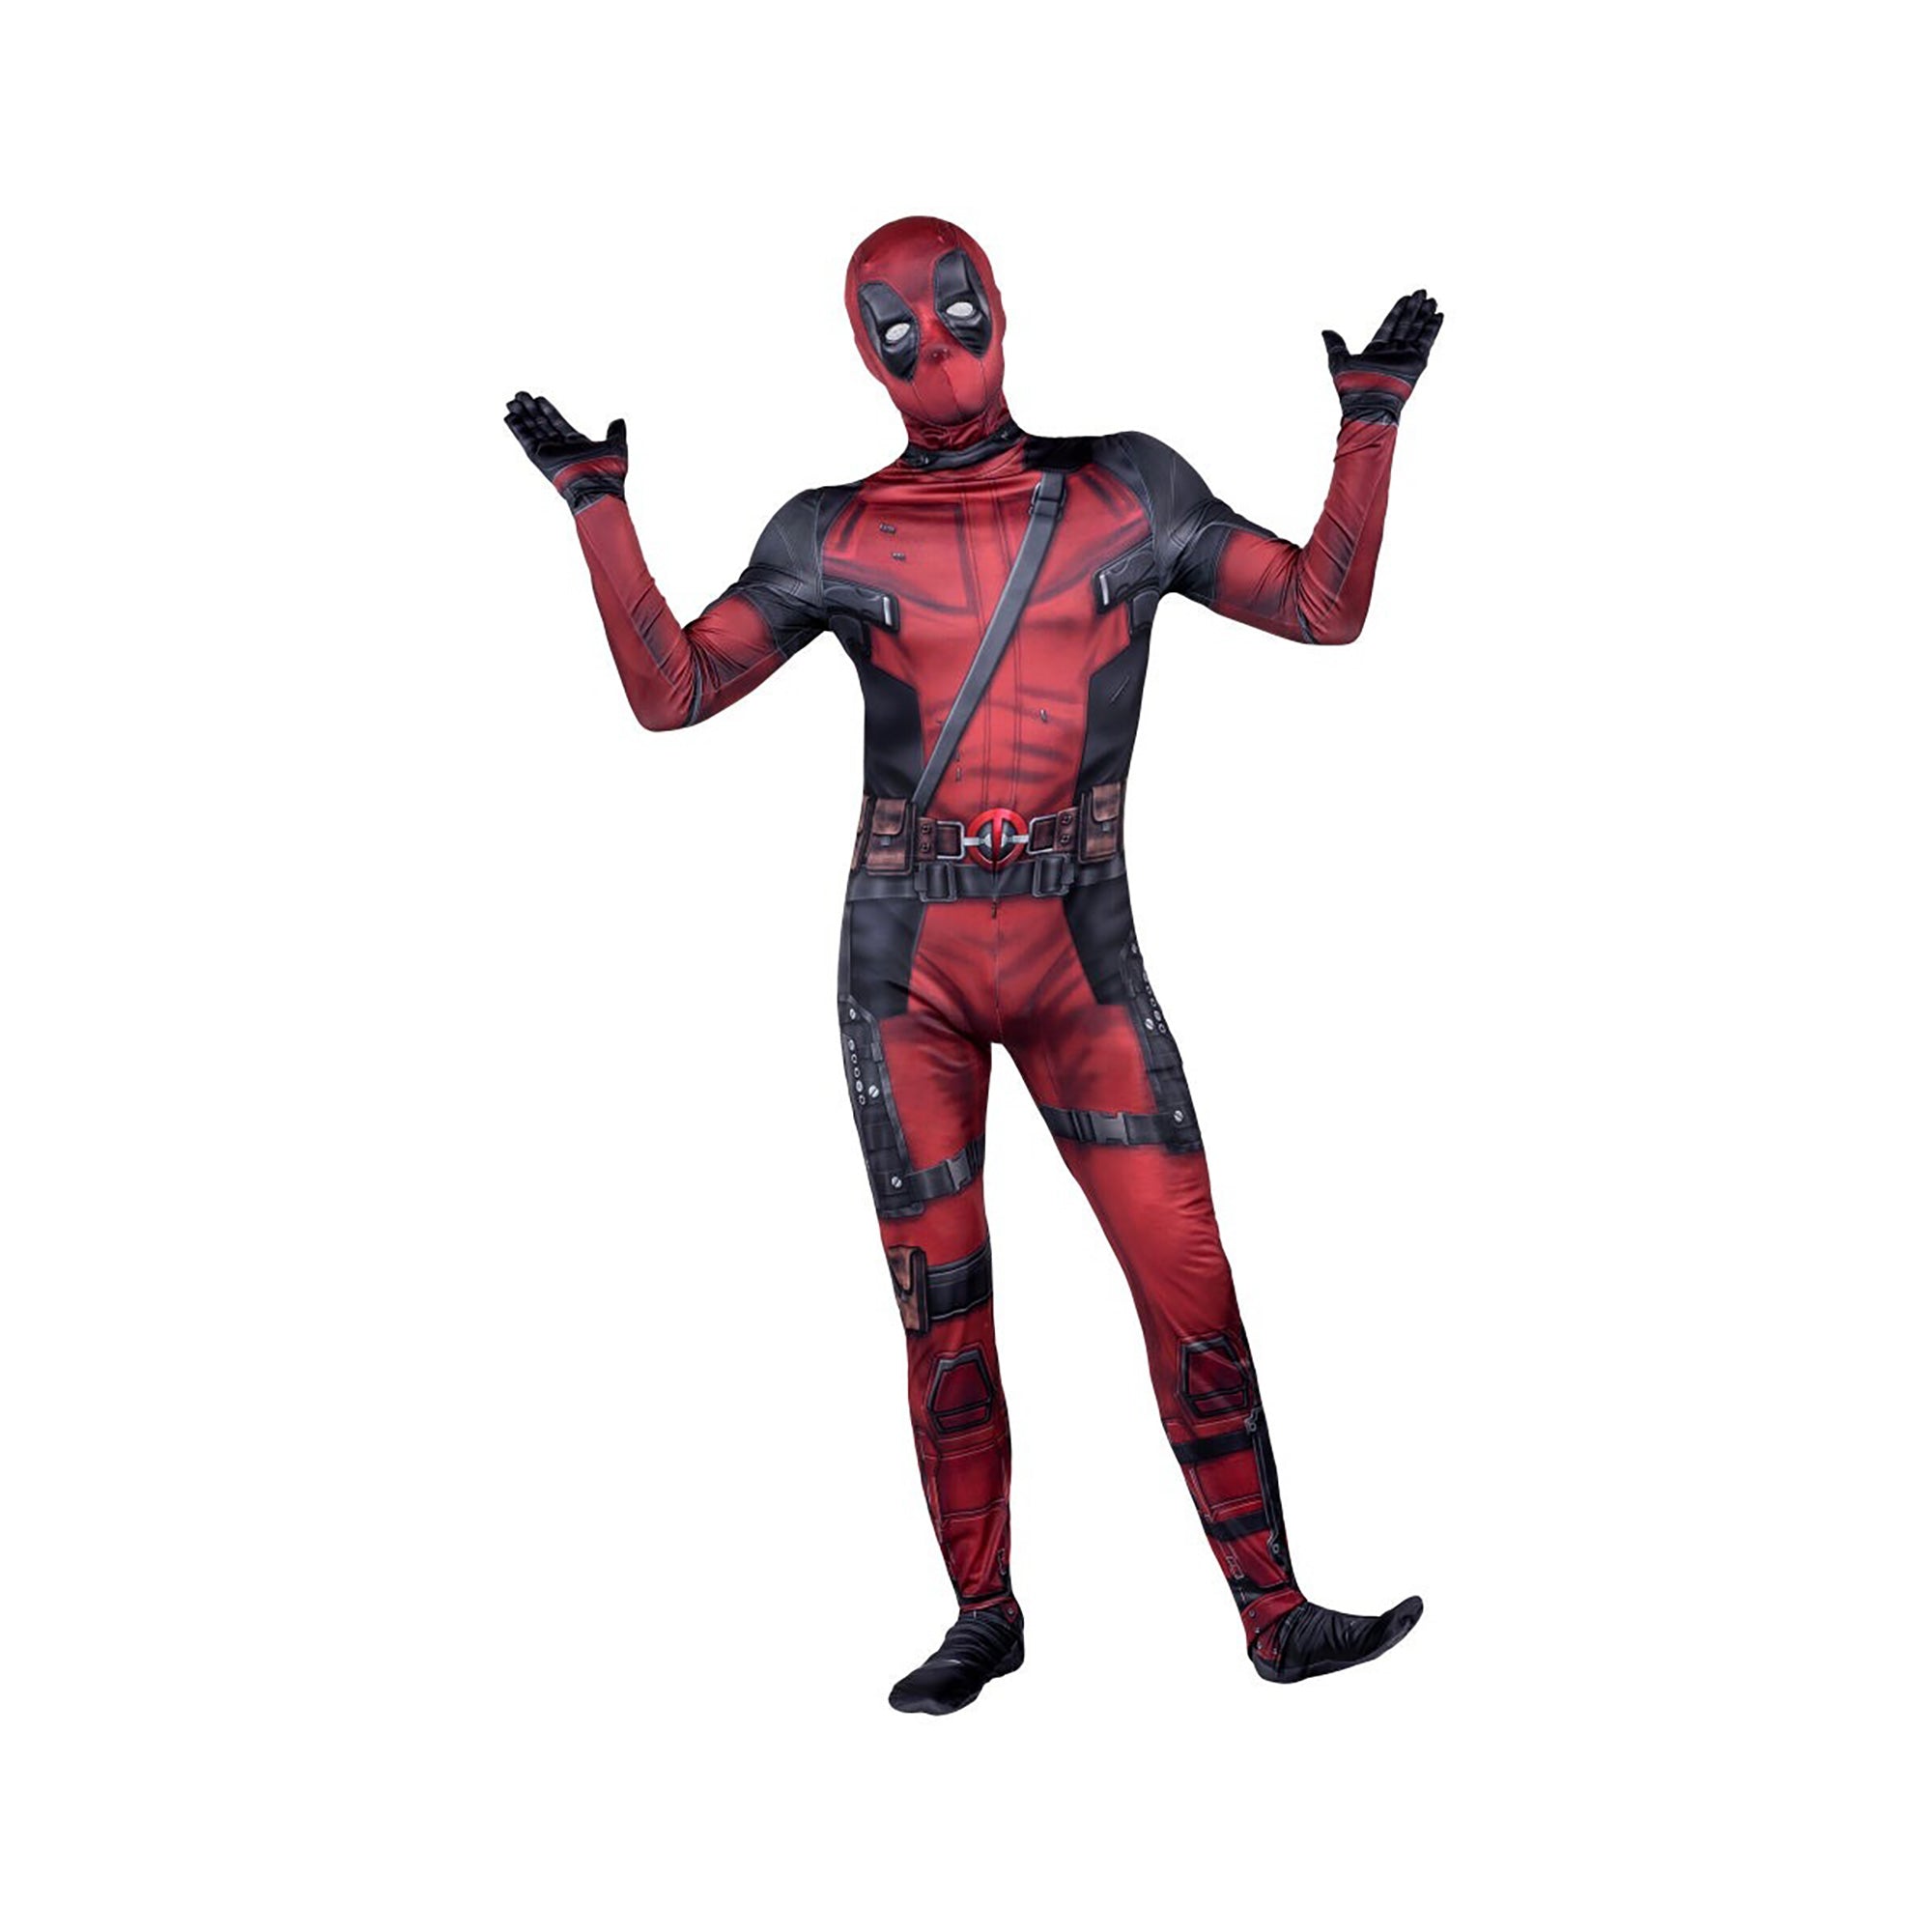 Marvel Deadpool Spandex Costume for Adults, Suit and Mask